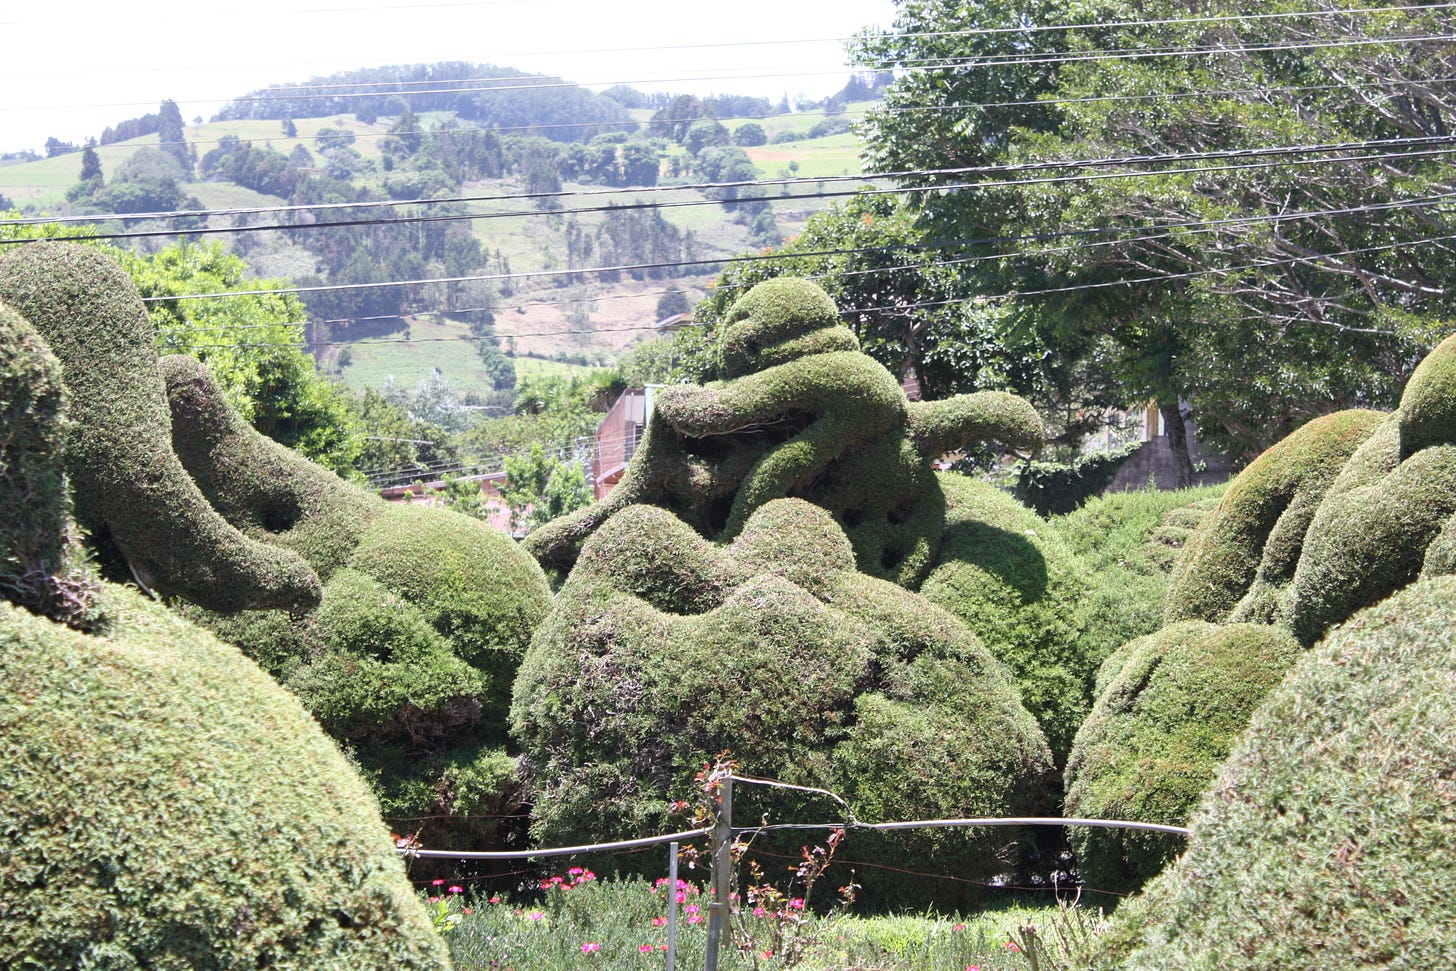 photo of a topiary garden where the trees are trimmed to look like animals